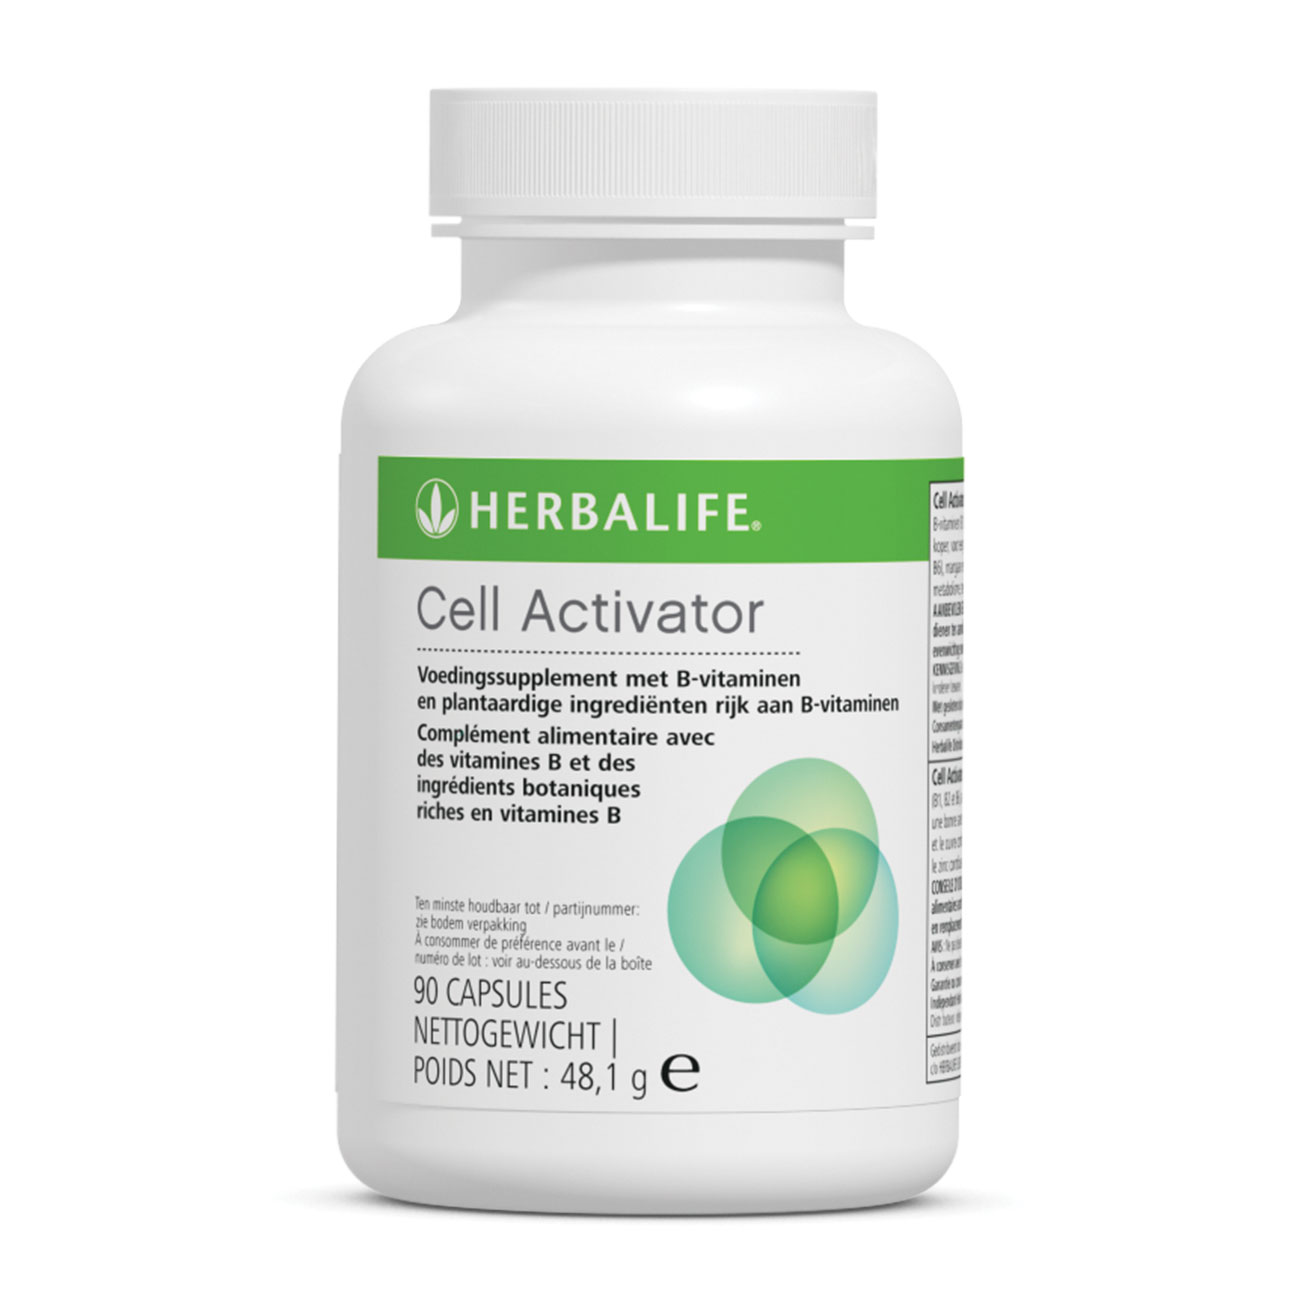 Cell activator voedingssupplement product shot